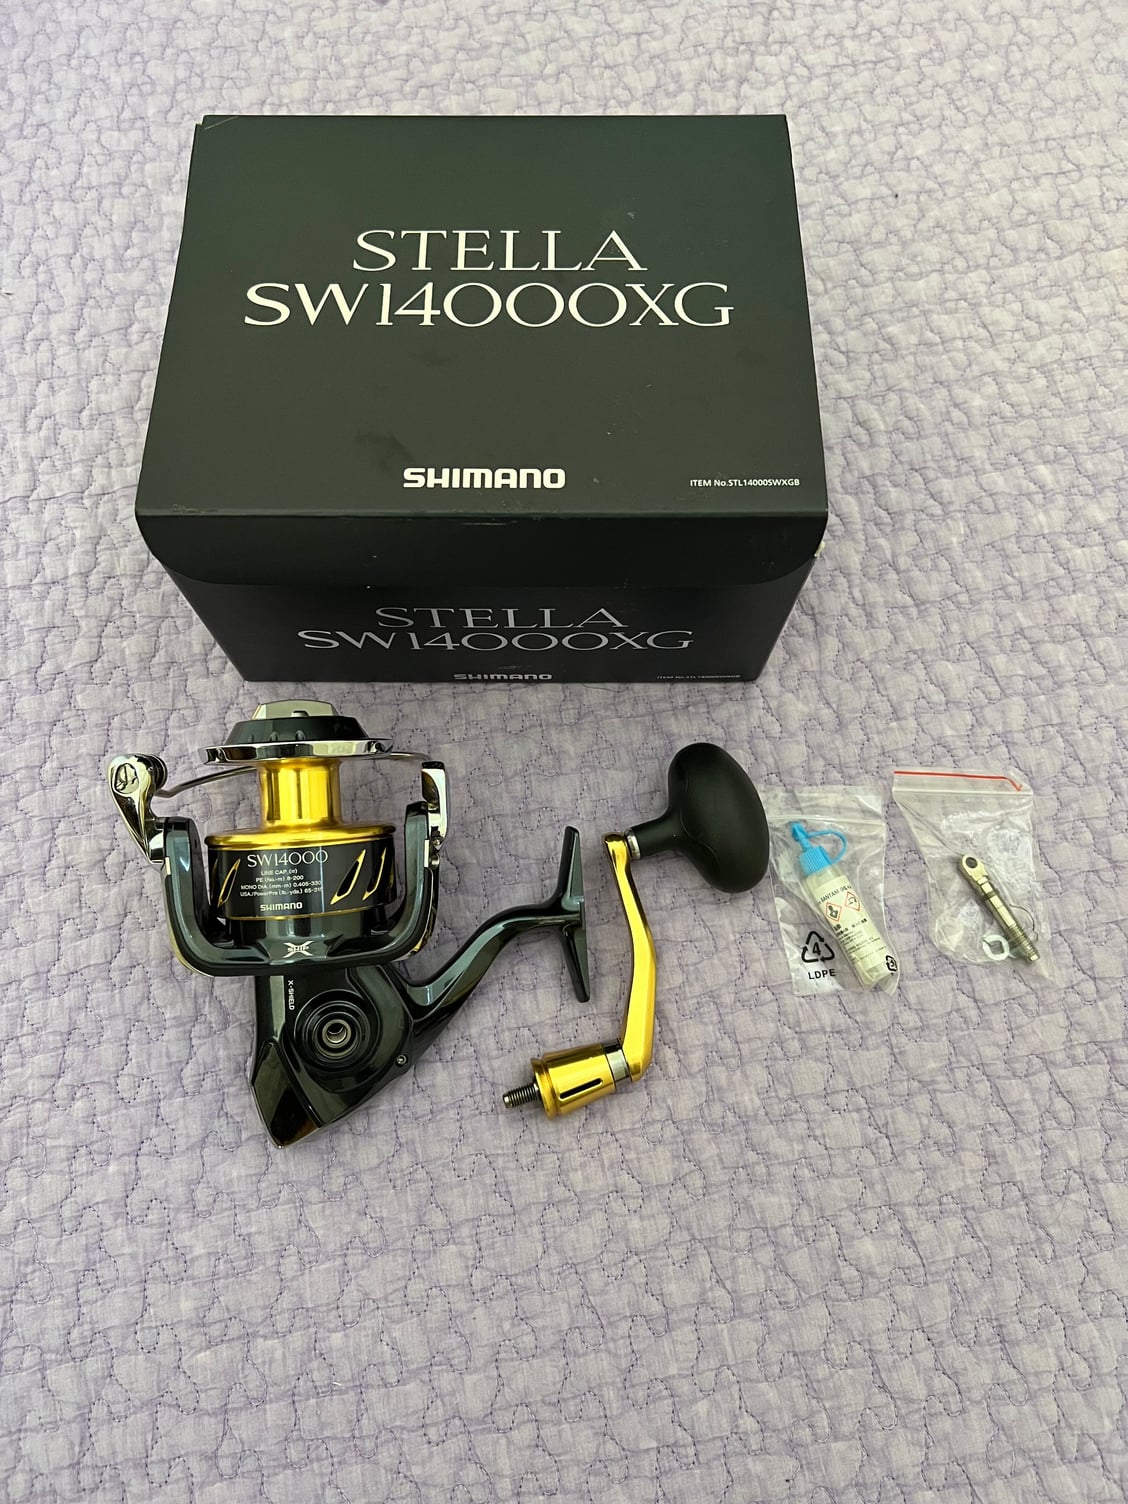 WTS Shimano stella 14k - The Hull Truth - Boating and Fishing Forum